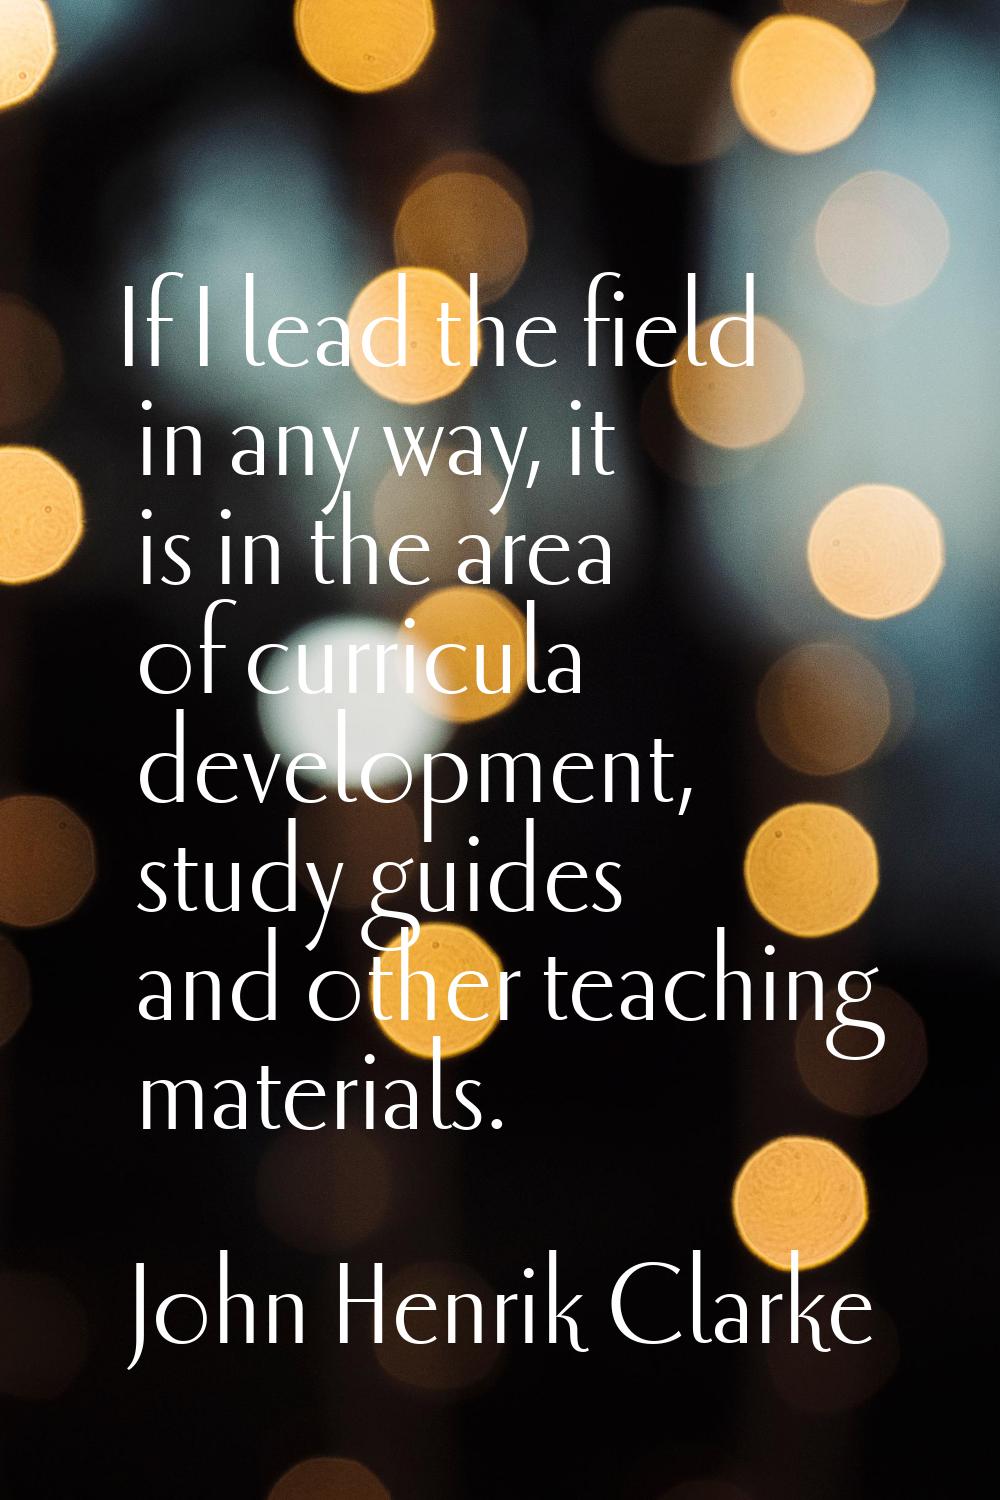 If I lead the field in any way, it is in the area of curricula development, study guides and other 